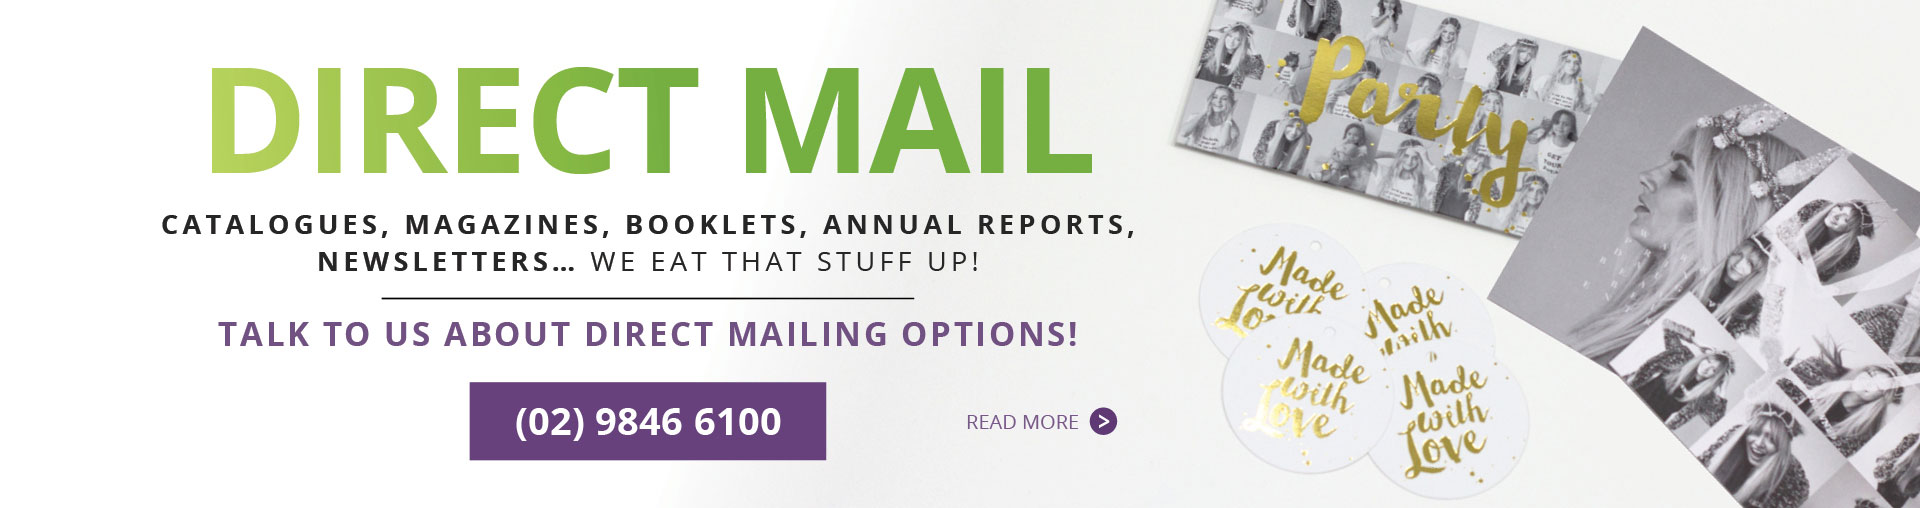 Direct Mail // Catalogues, Magazines, Booklets, Annual Reports, Newsletters.. we eat that stuff up! // Talk to us about direct mailing options! // Read more